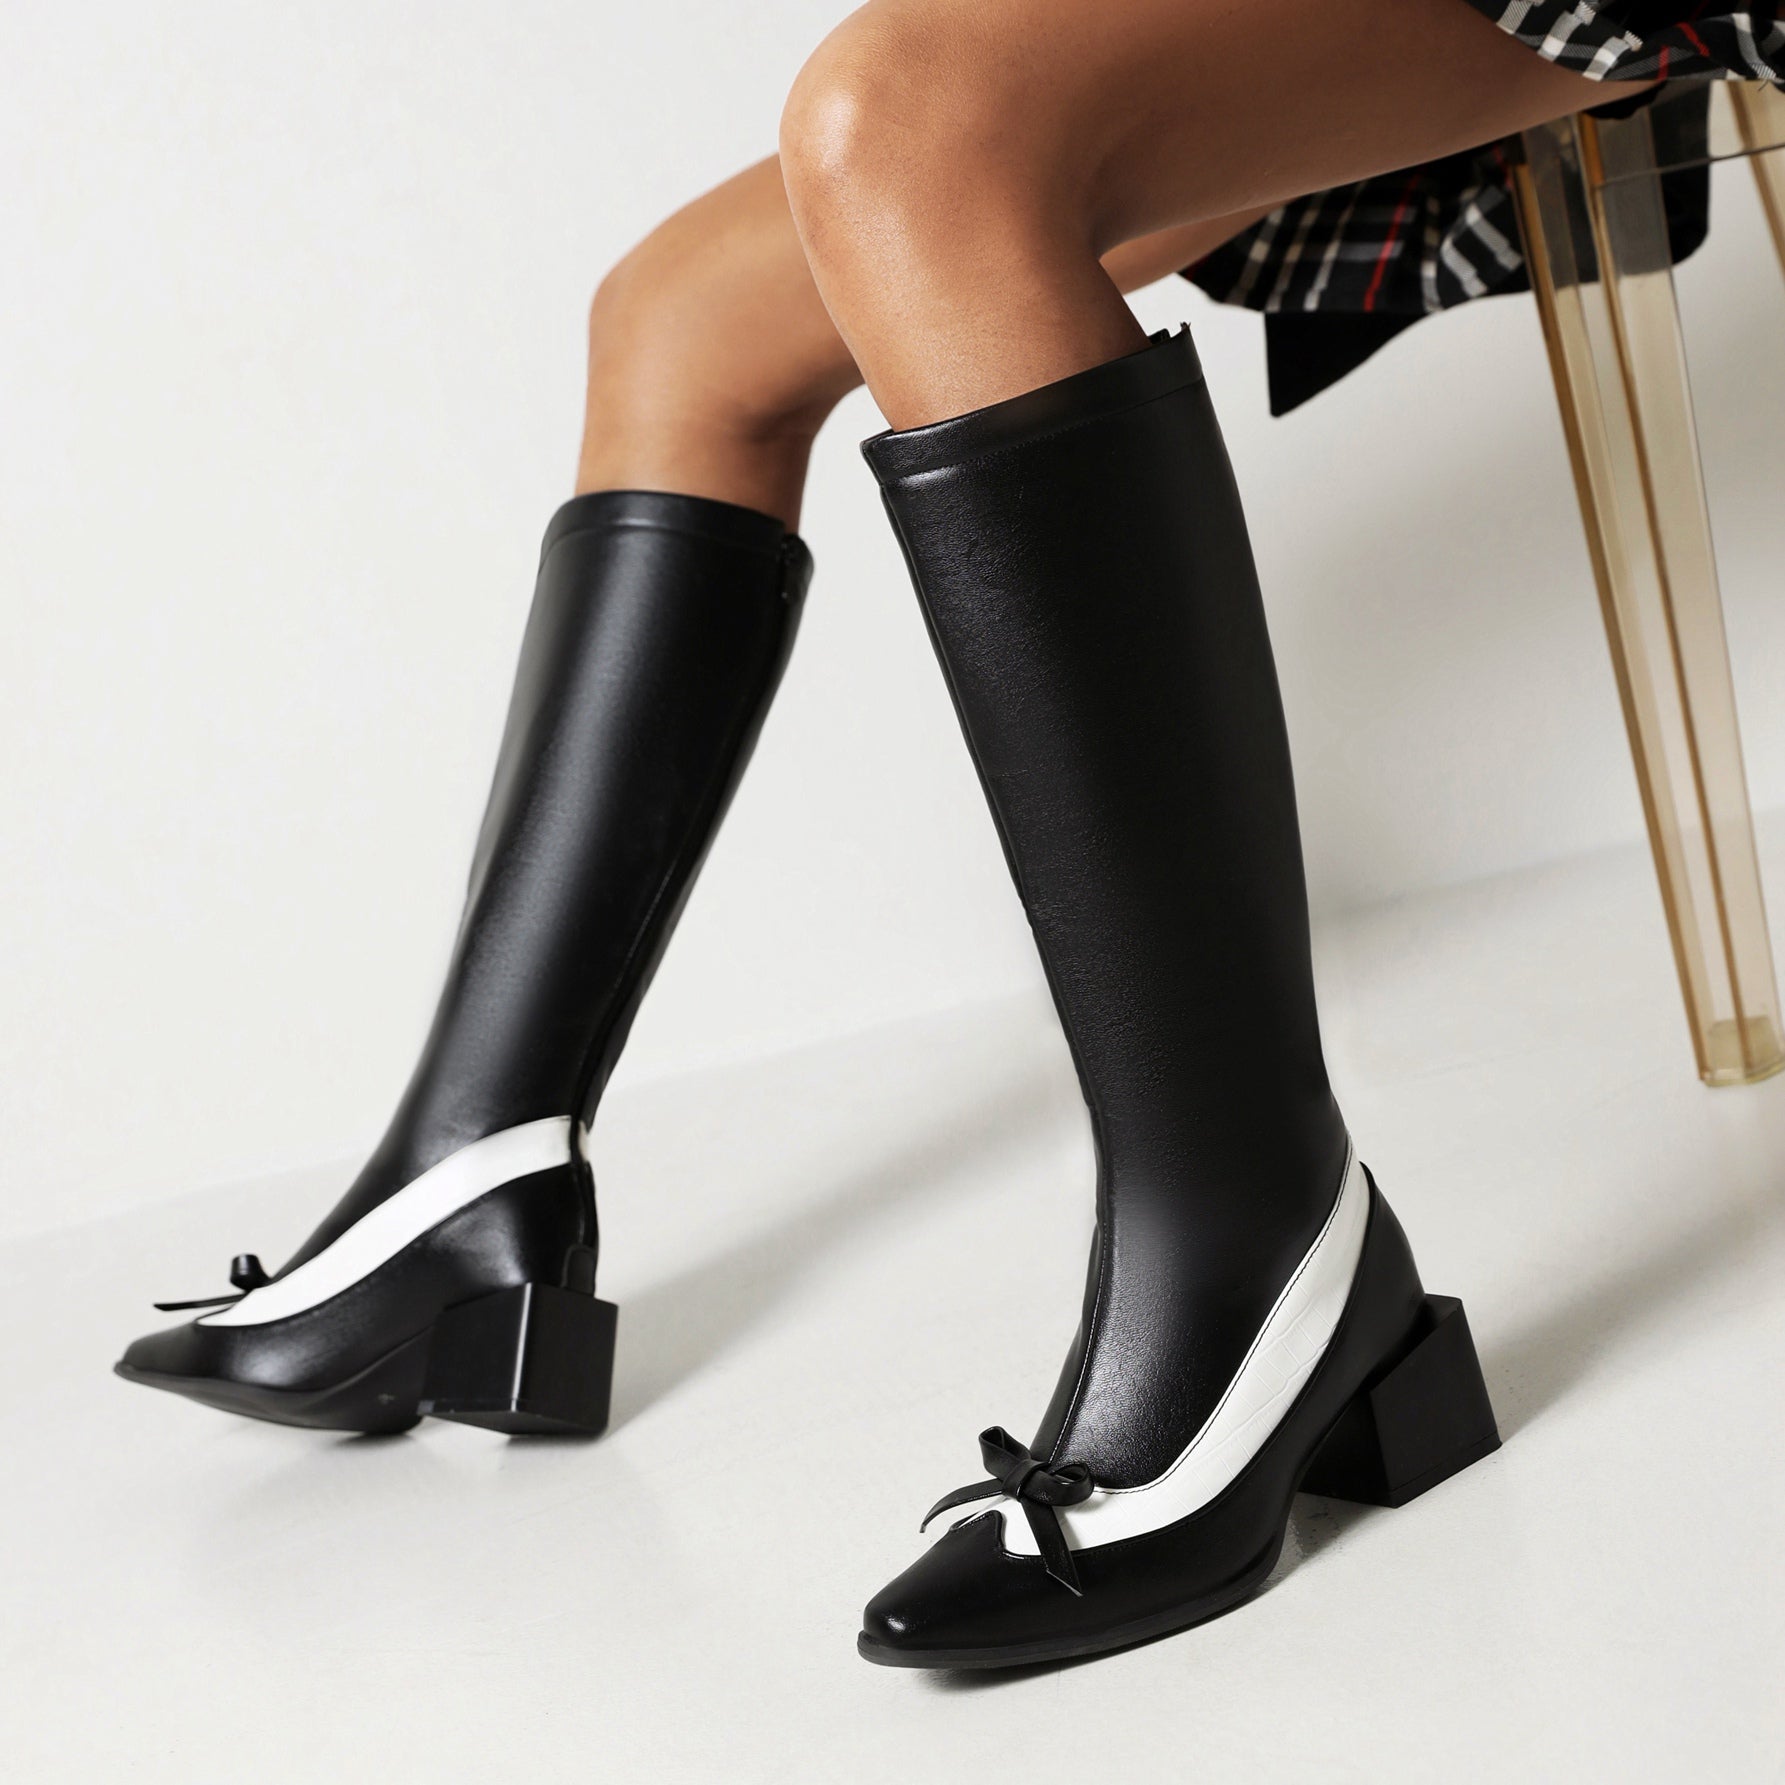 Bigsizeheels Simple Bow Pointed Over-The-Knee Boots-Black freeshipping - bigsizeheel®-size5-size15 -All Plus Sizes Available!